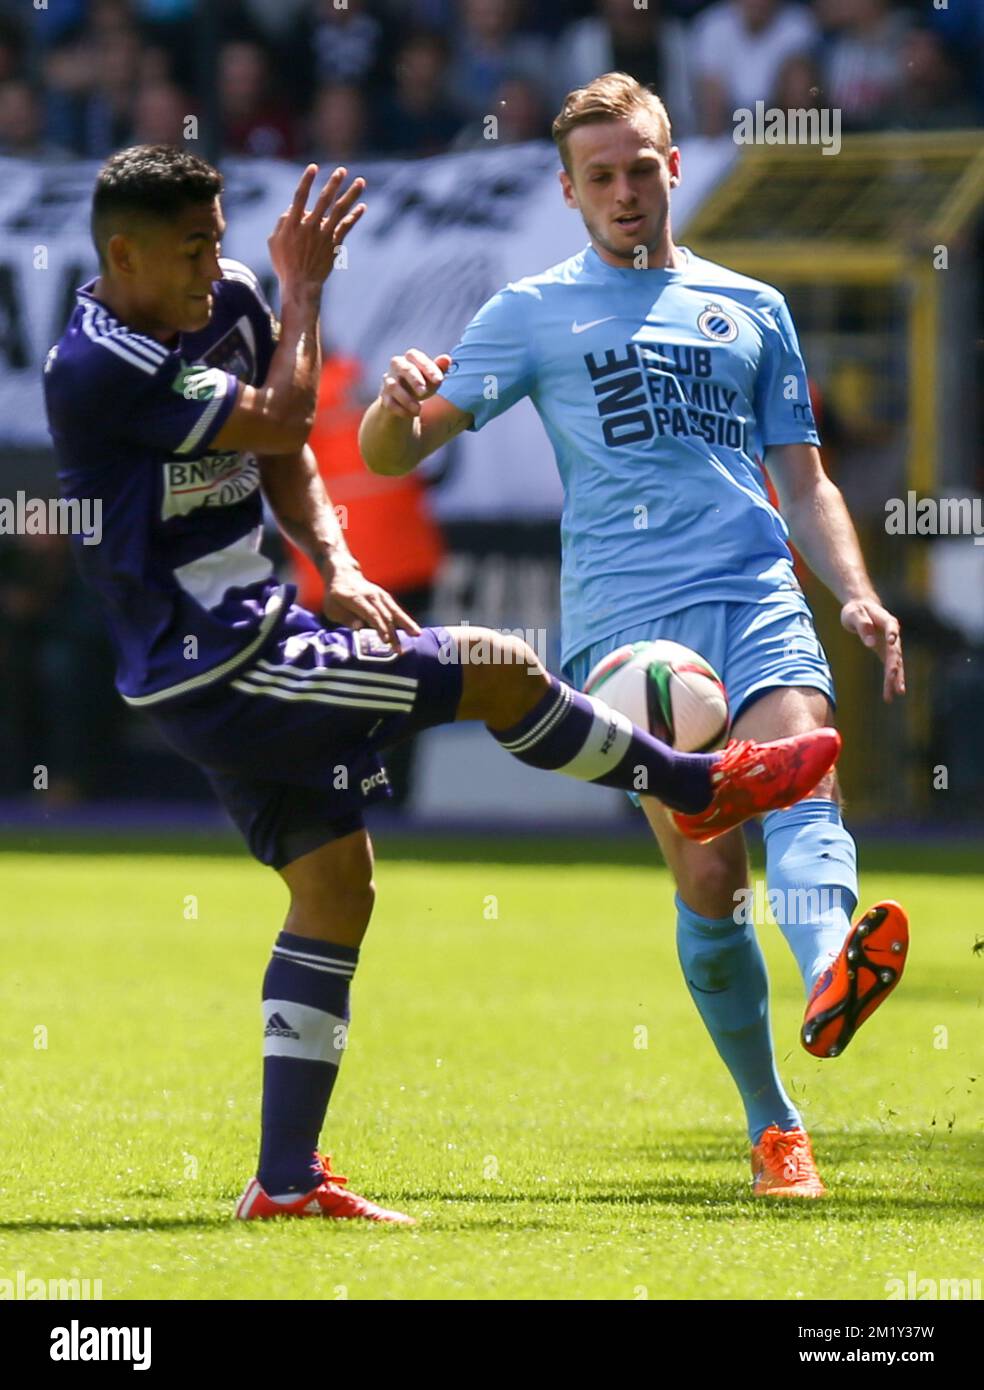 20150510 - BRUSSELS, BELGIUM: Anderlecht's Andy Najar and Club's Laurens De Bock fight for the ball during the Jupiler Pro League match between RSC Anderlecht and Club Brugge, Sunday 10 May 2015 in Brussels, on the seventh day of the Play-off 1. BELGA PHOTO VIRGINIE LEFOUR Stock Photo